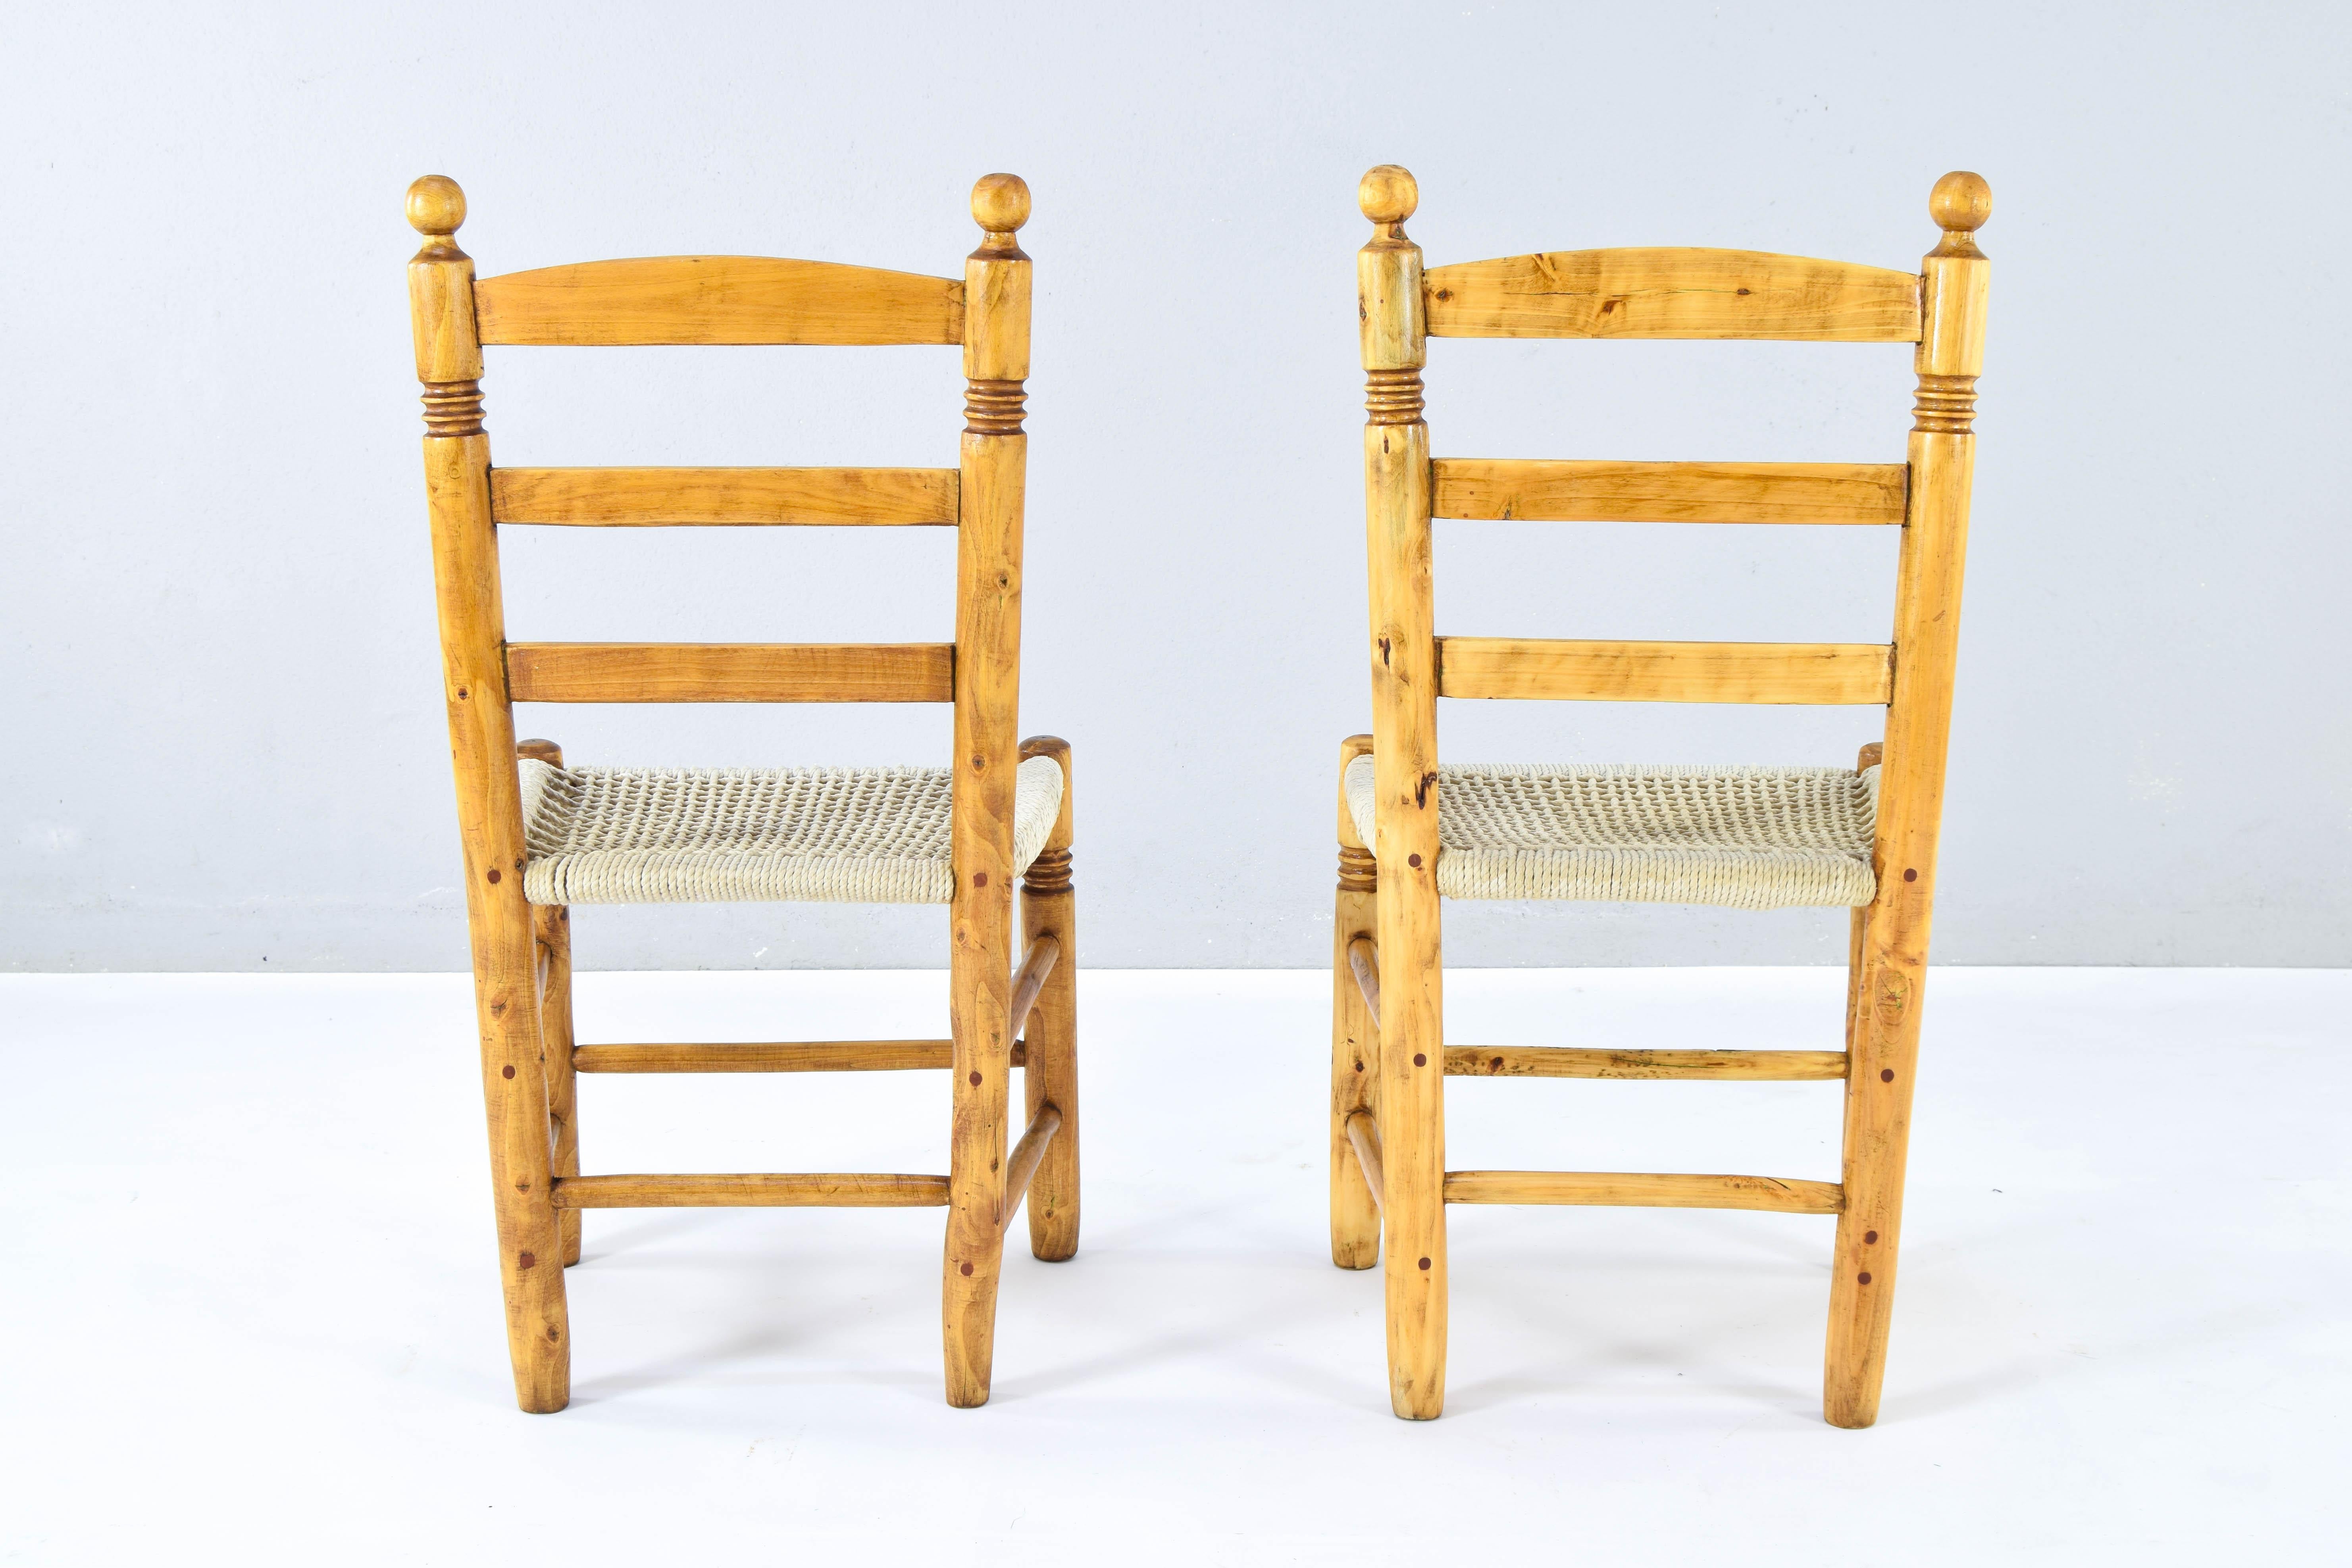 Antique low Traditional Andalusian Mediterranean Chairs made of Wood and Rope For Sale 1